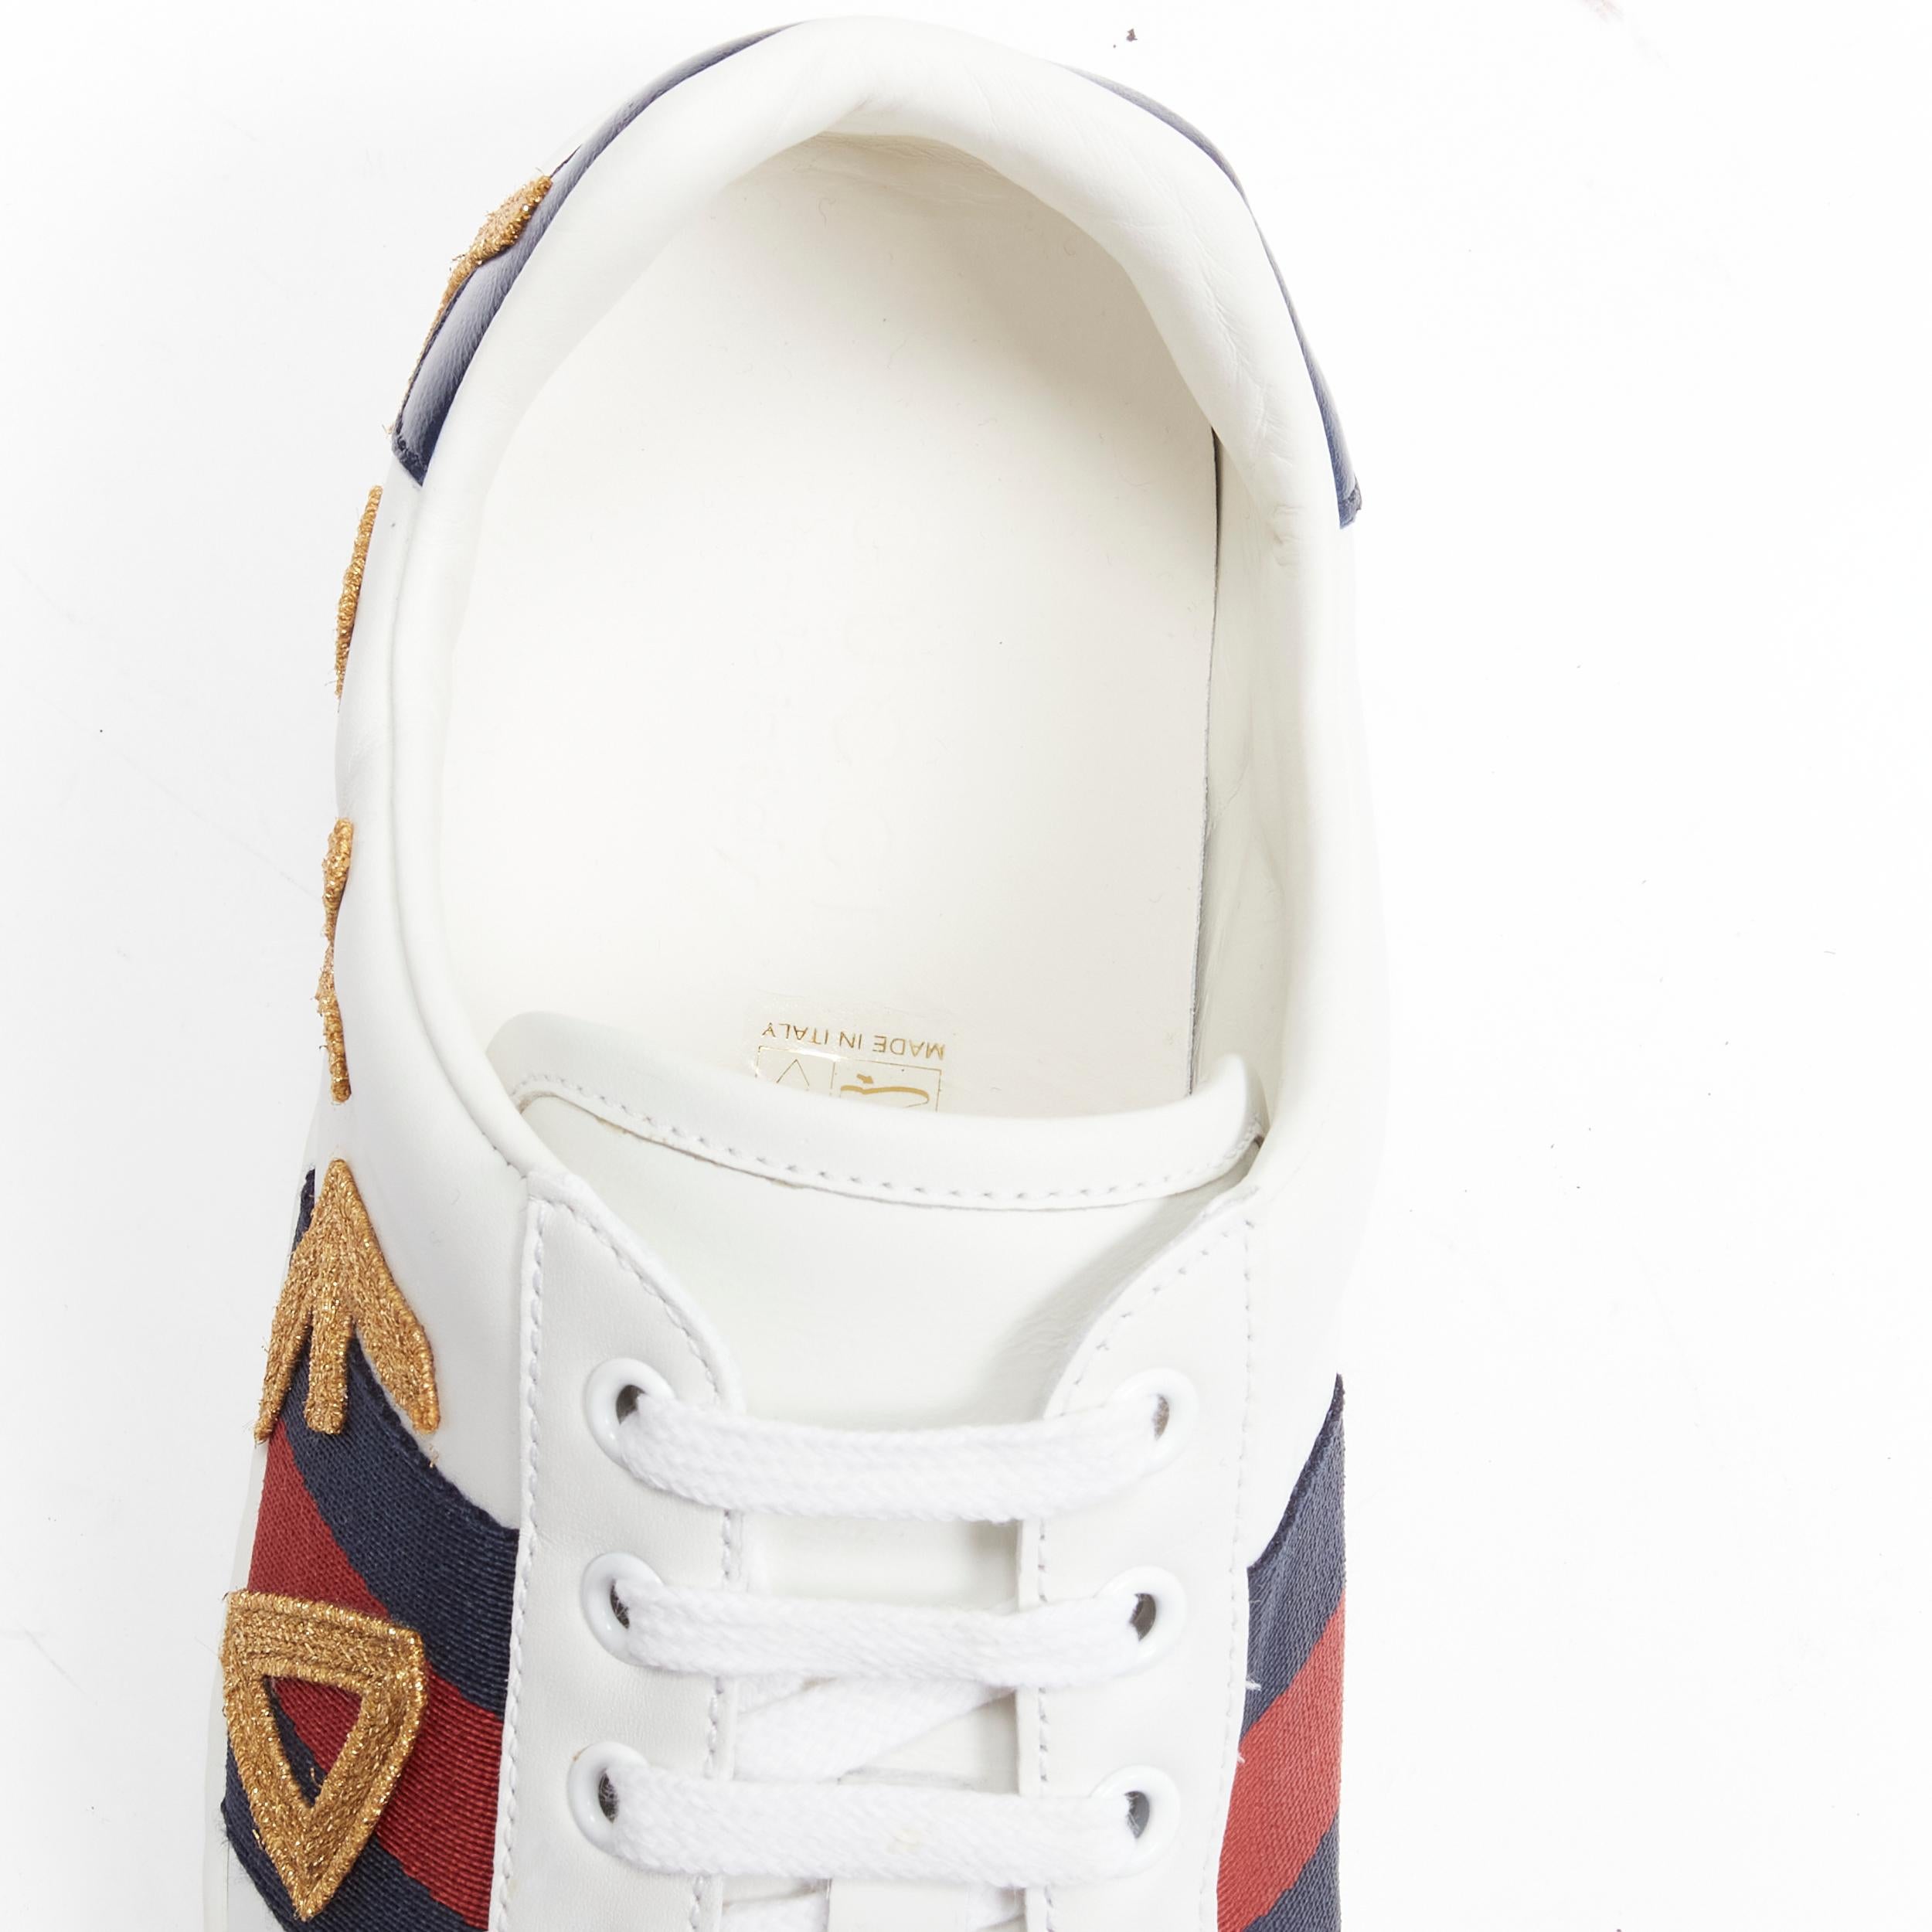 GUCCI Ace Loved gold embroidered blue red web leather sneakers UK7 EU41 For Sale 4